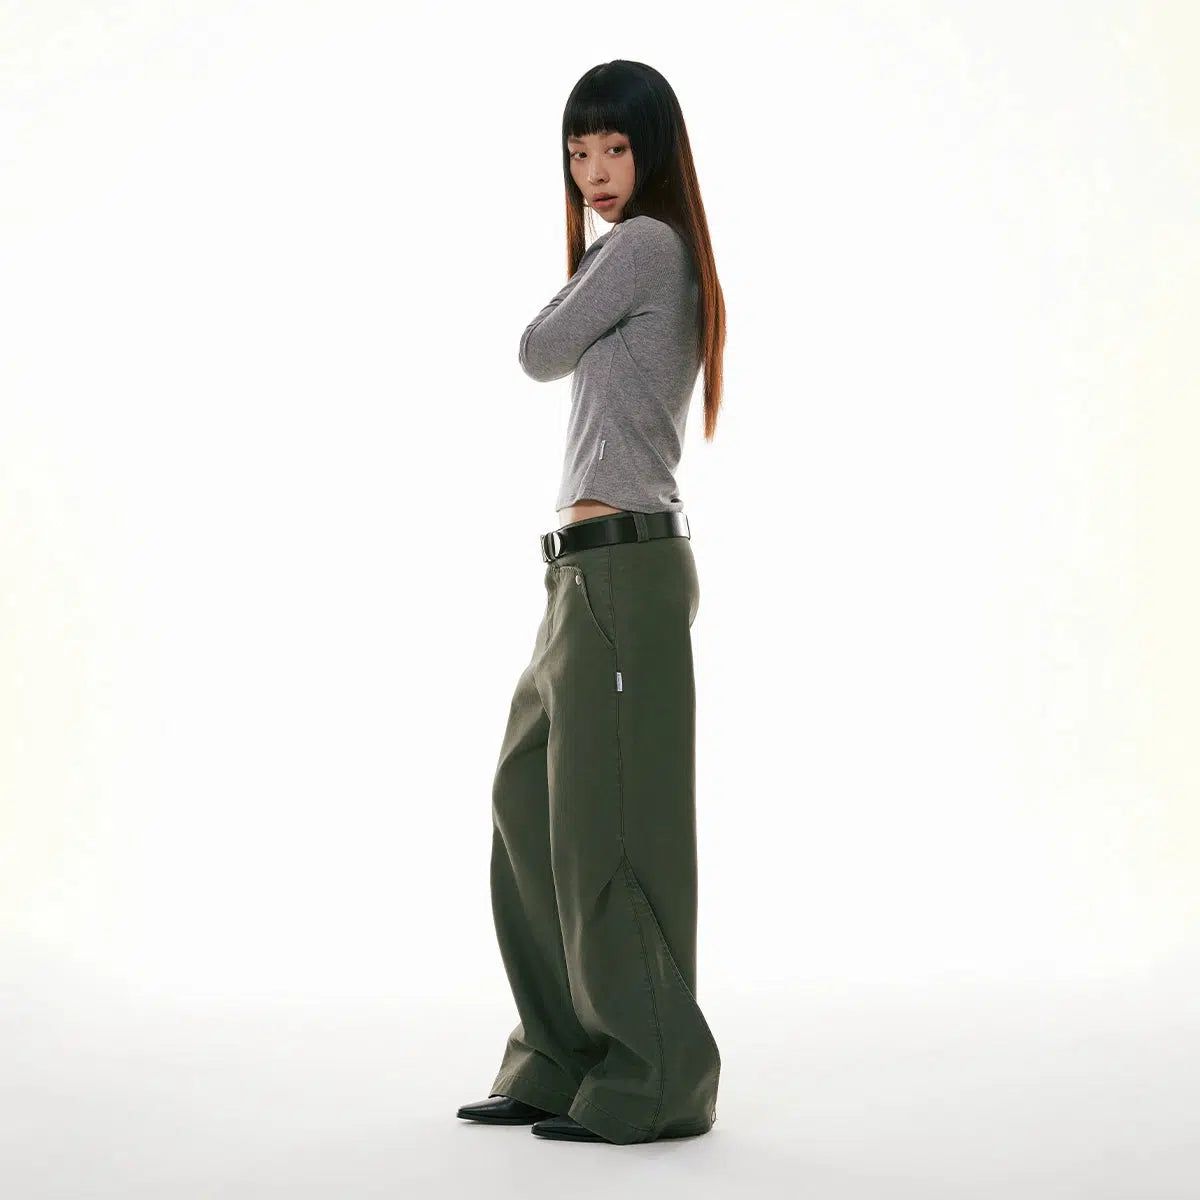 Wide Leg Cut Workwear Jeans Korean Street Fashion Jeans By Funky Fun Shop Online at OH Vault